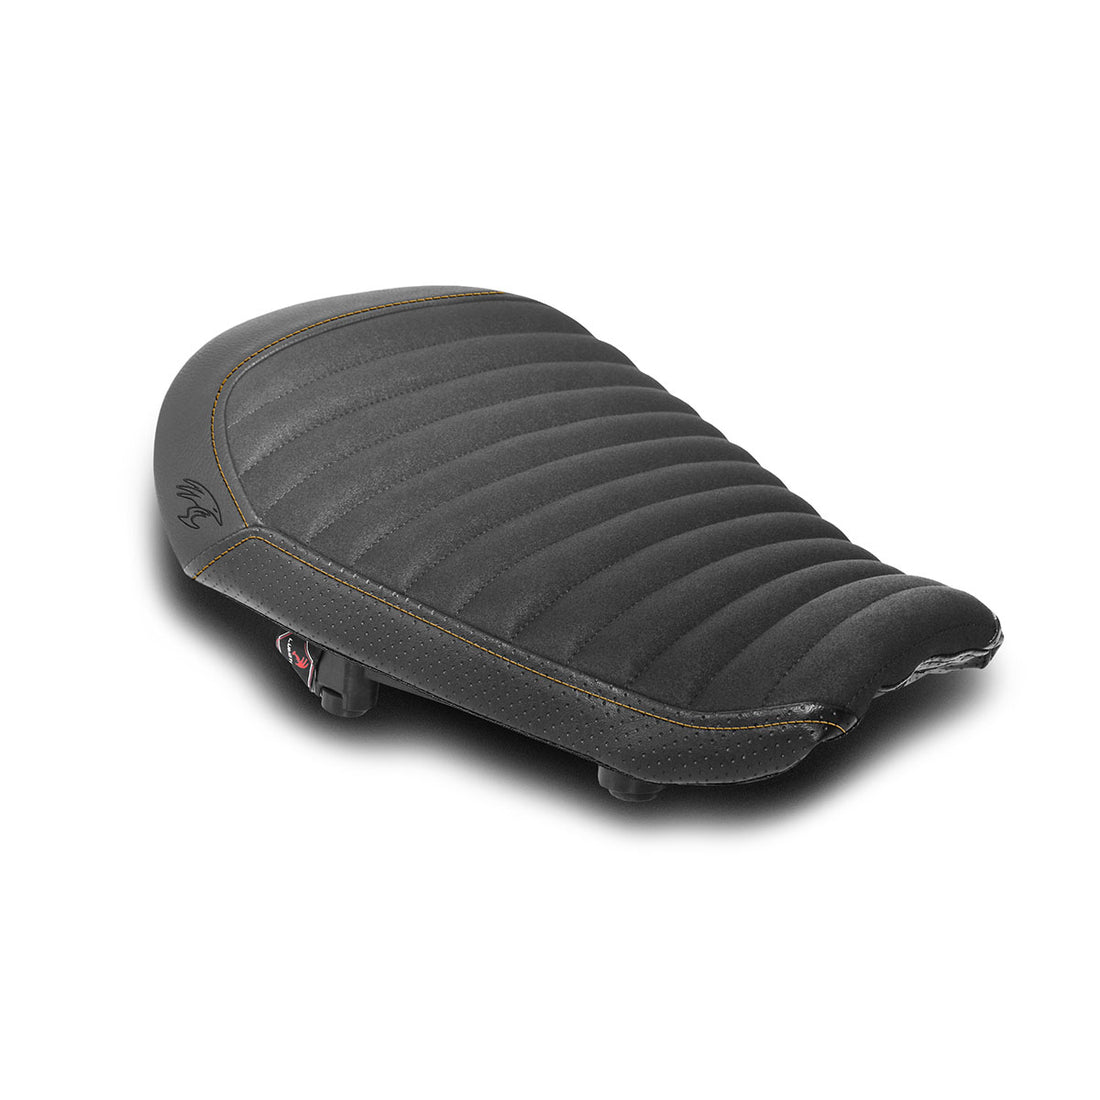 Harley Davidson | Sportster S 21-23 | Classic | Rider Seat Cover